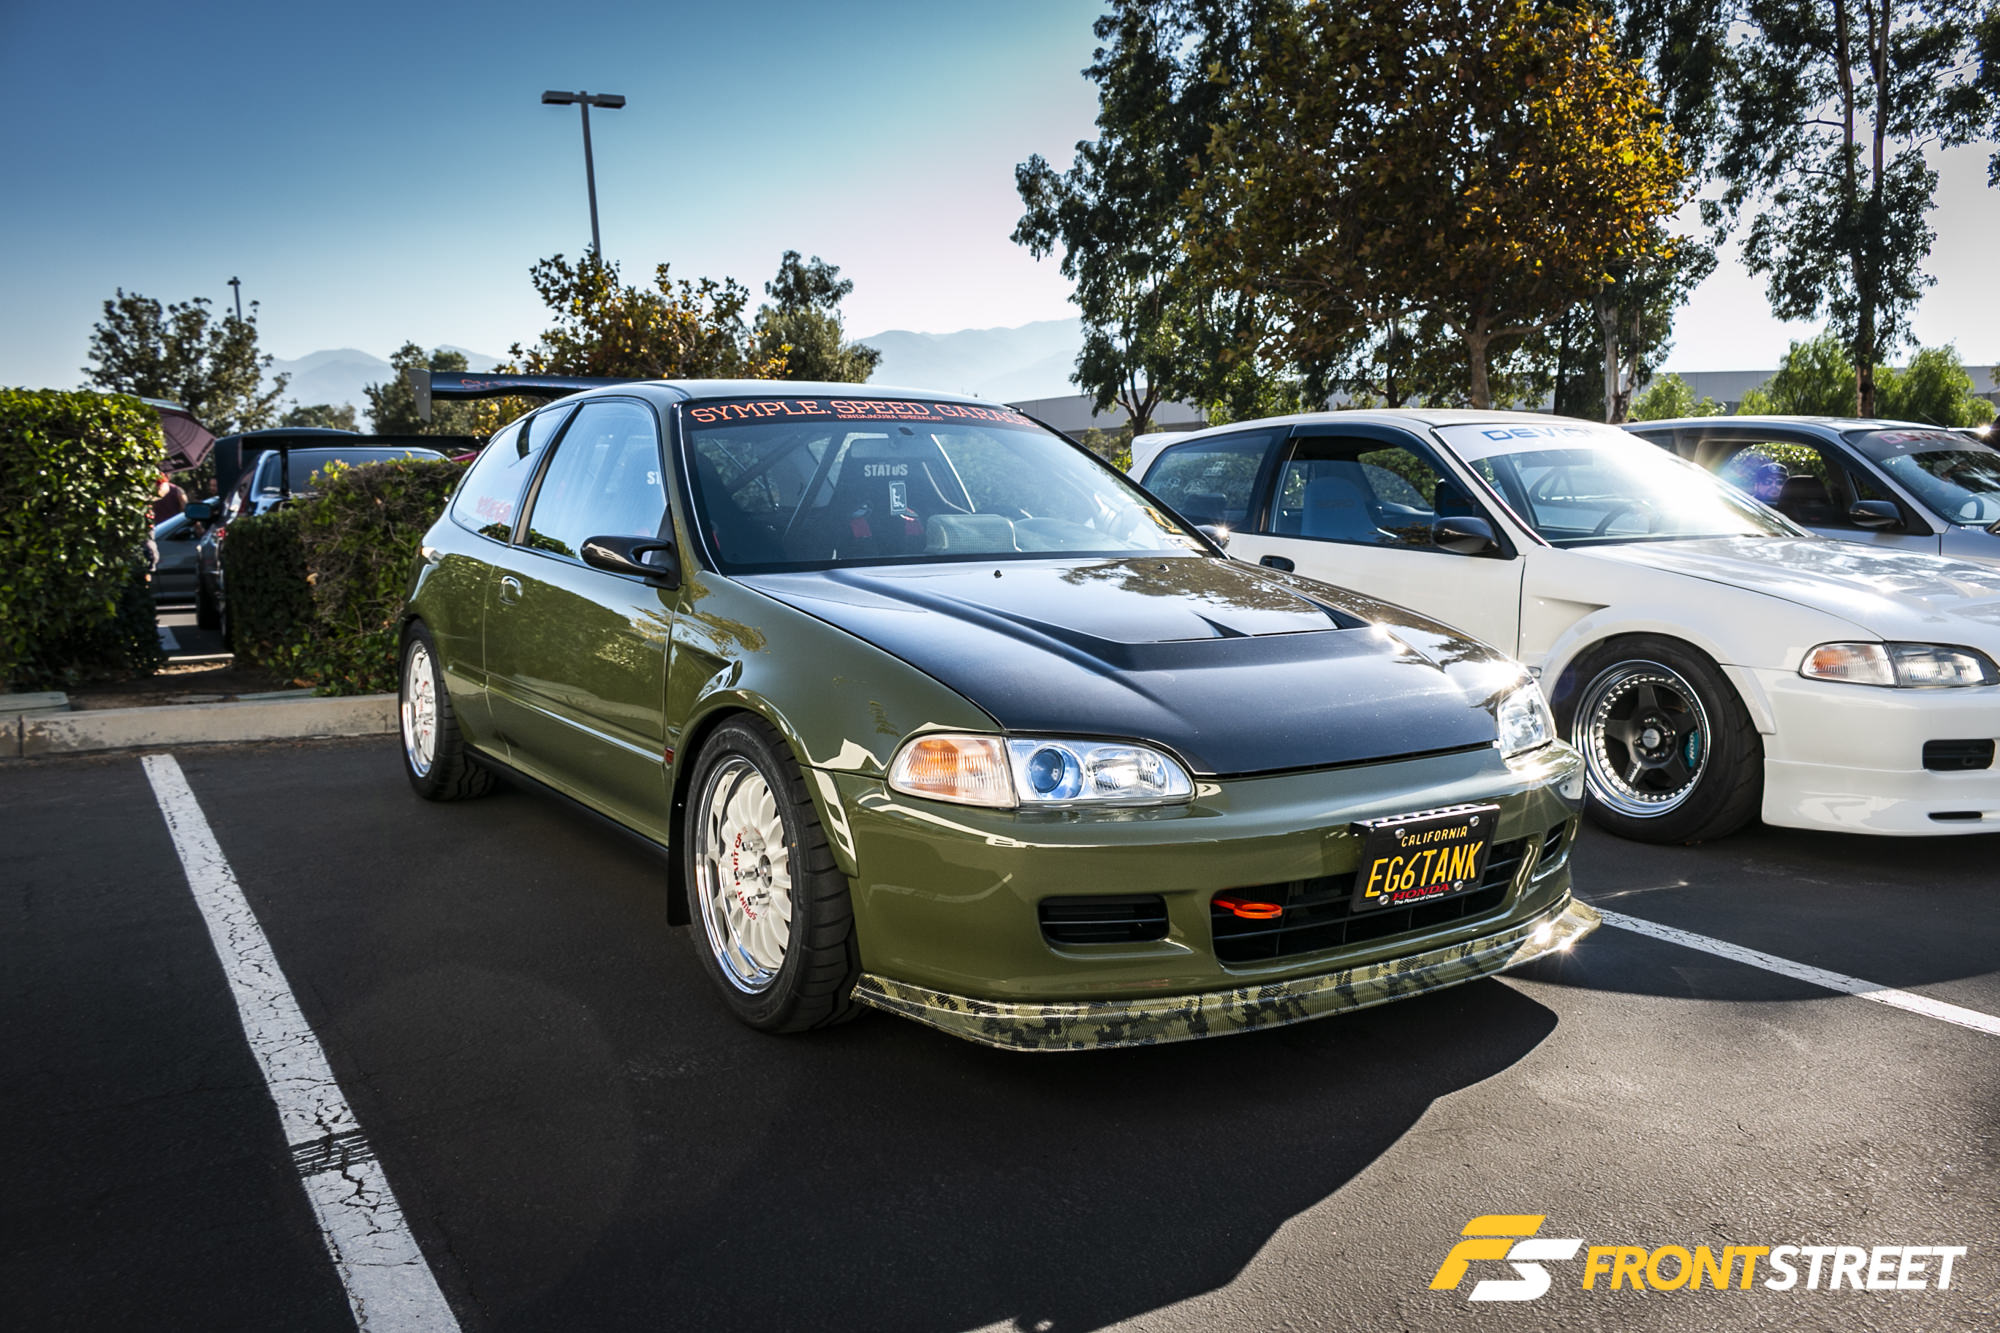 Clean Cars Converge On The Chronicles Year10 Meet